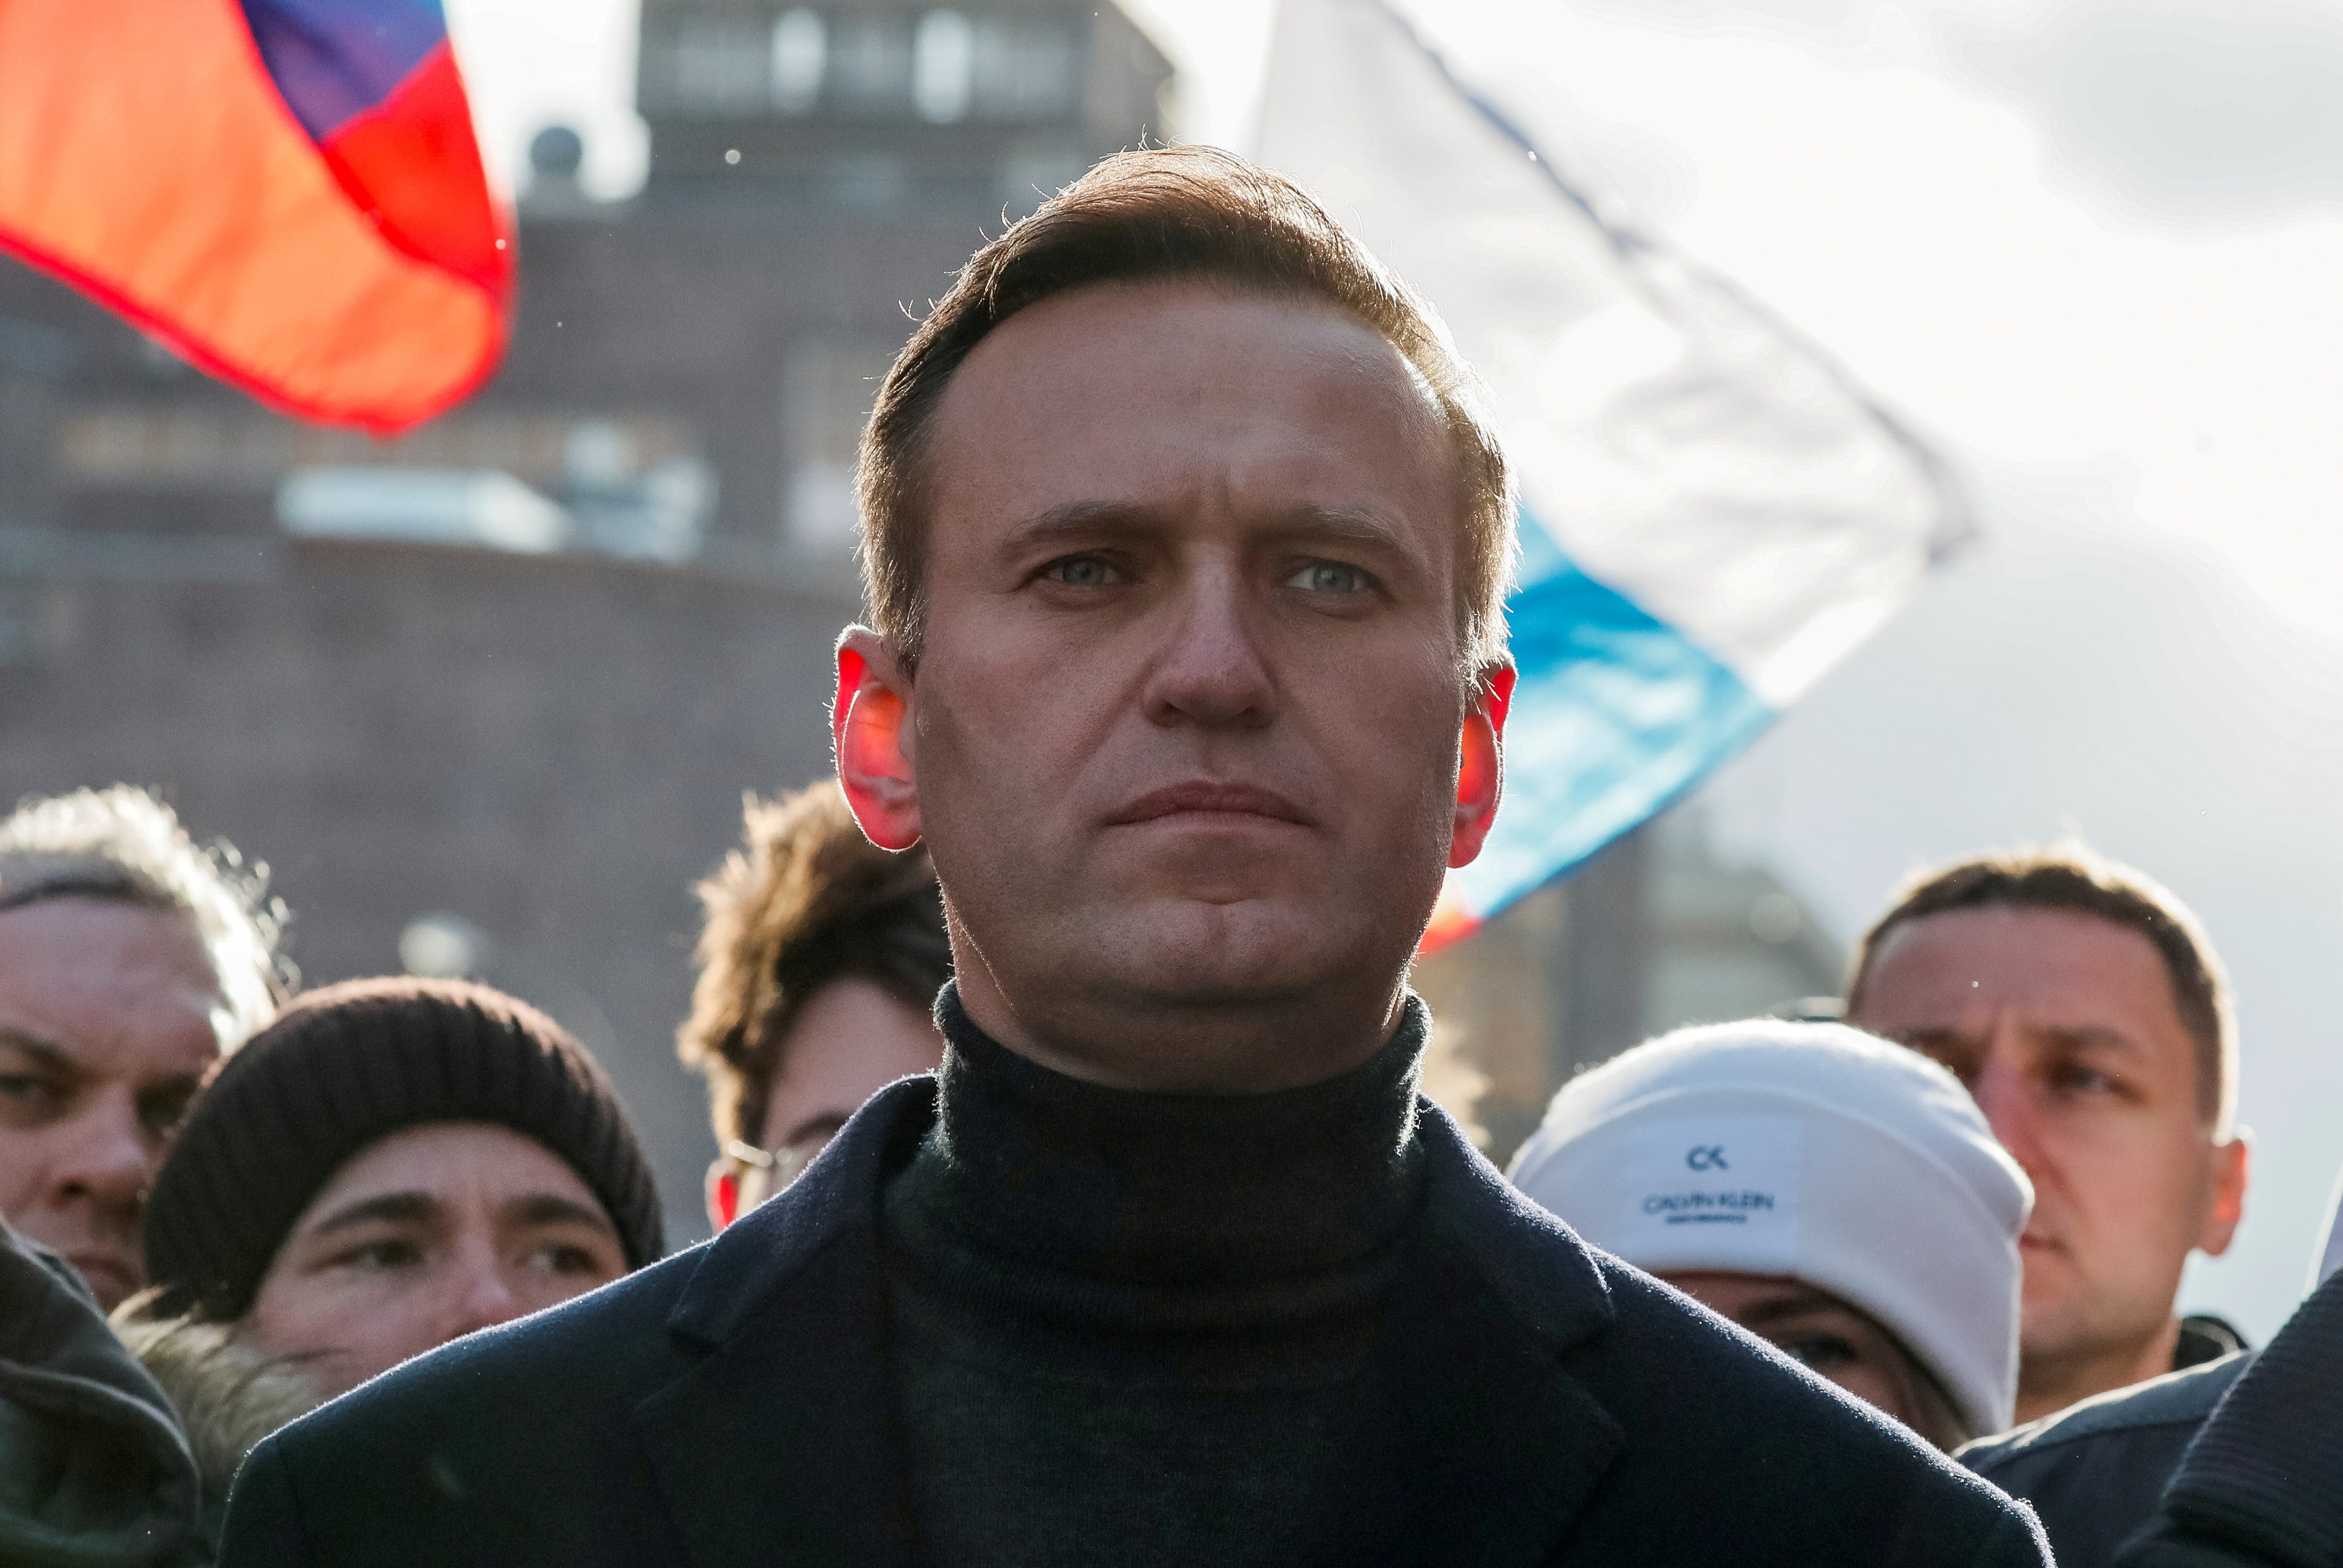 Protests planned across Russia to ‘save Navalny’s life’ as West warns Putin